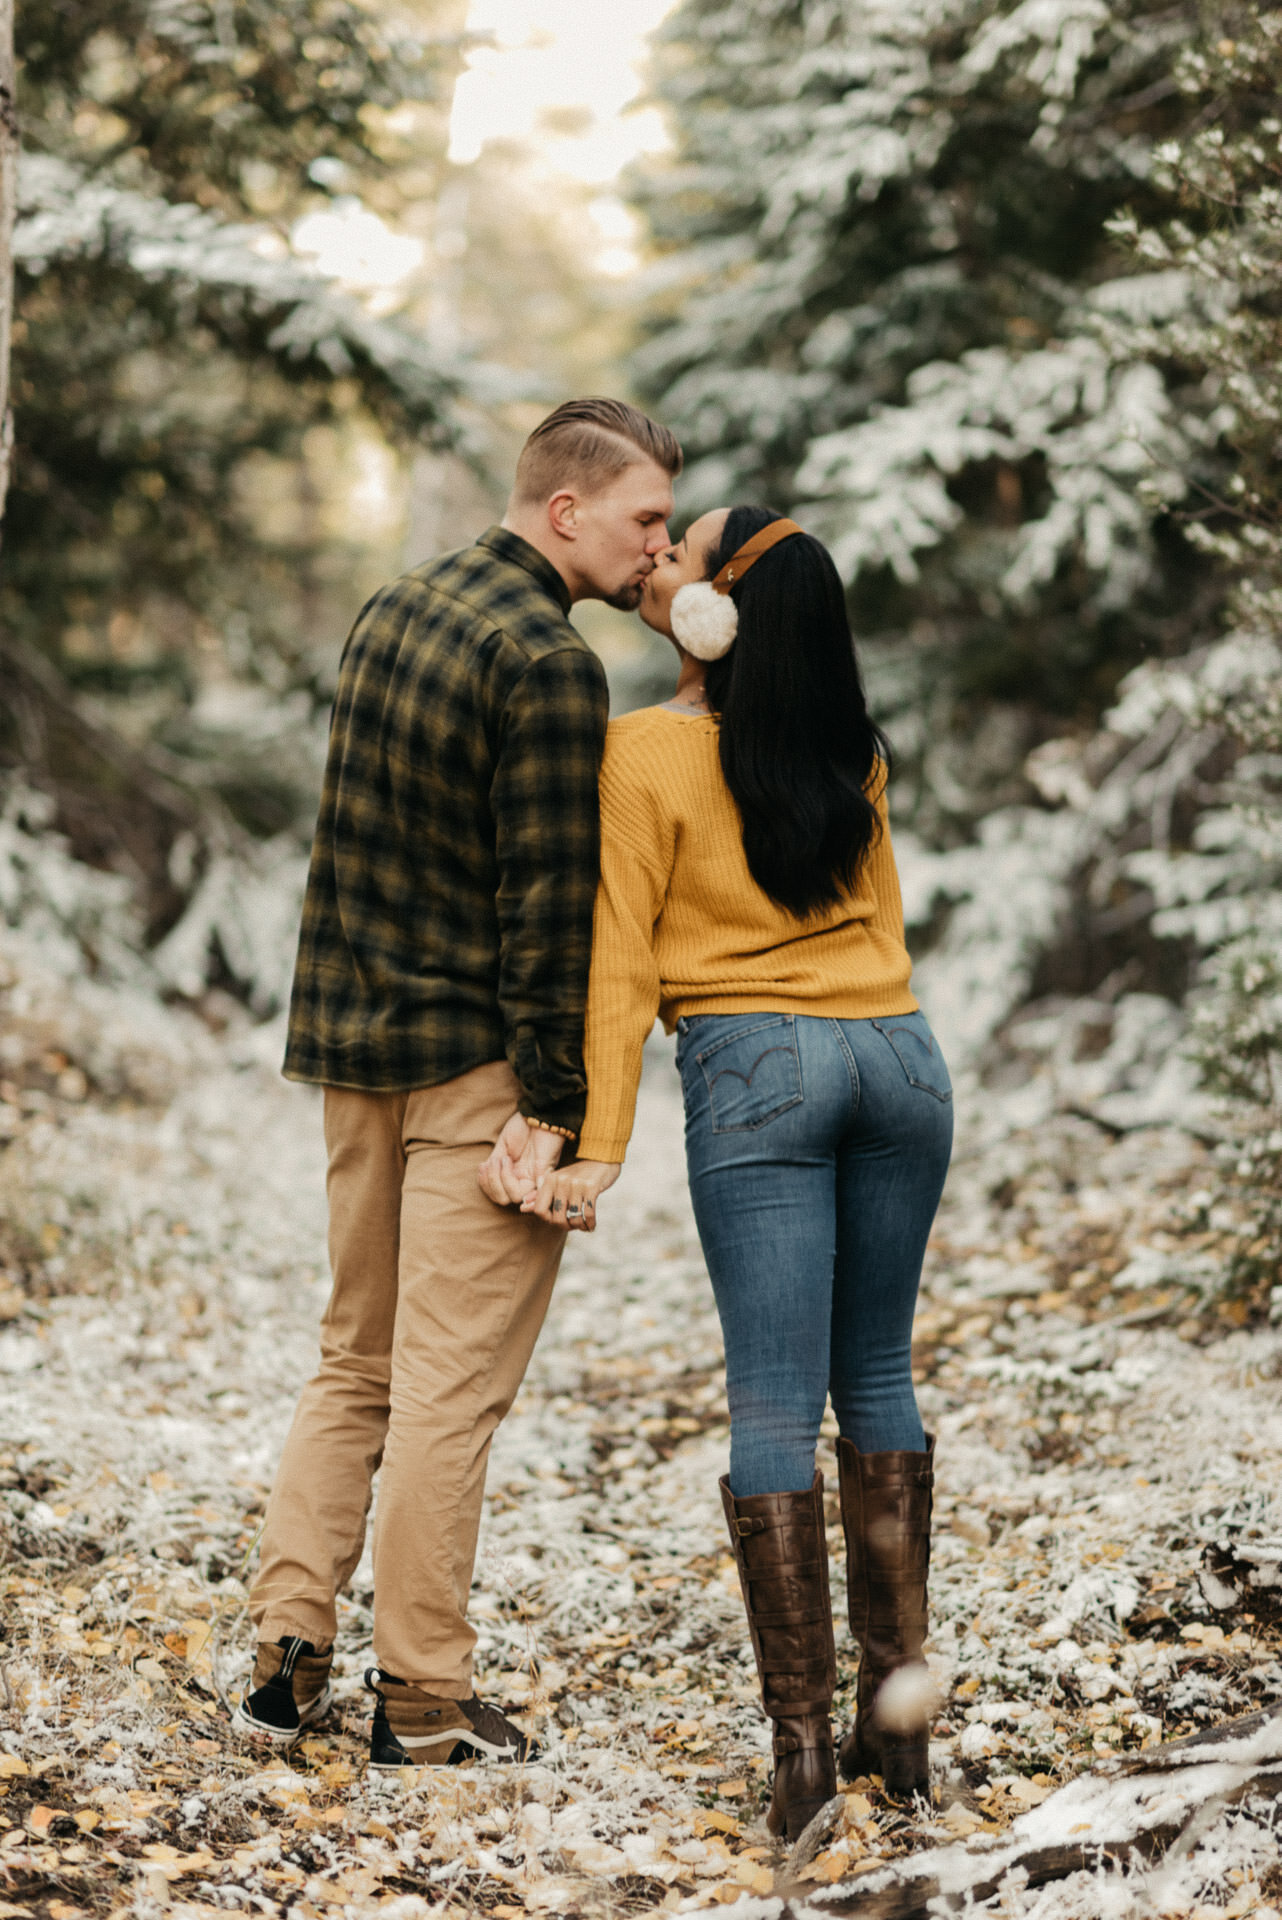 kelsey-rob-snowy-fall-leaves-evergreen-colorado-engagement-session-16.jpg